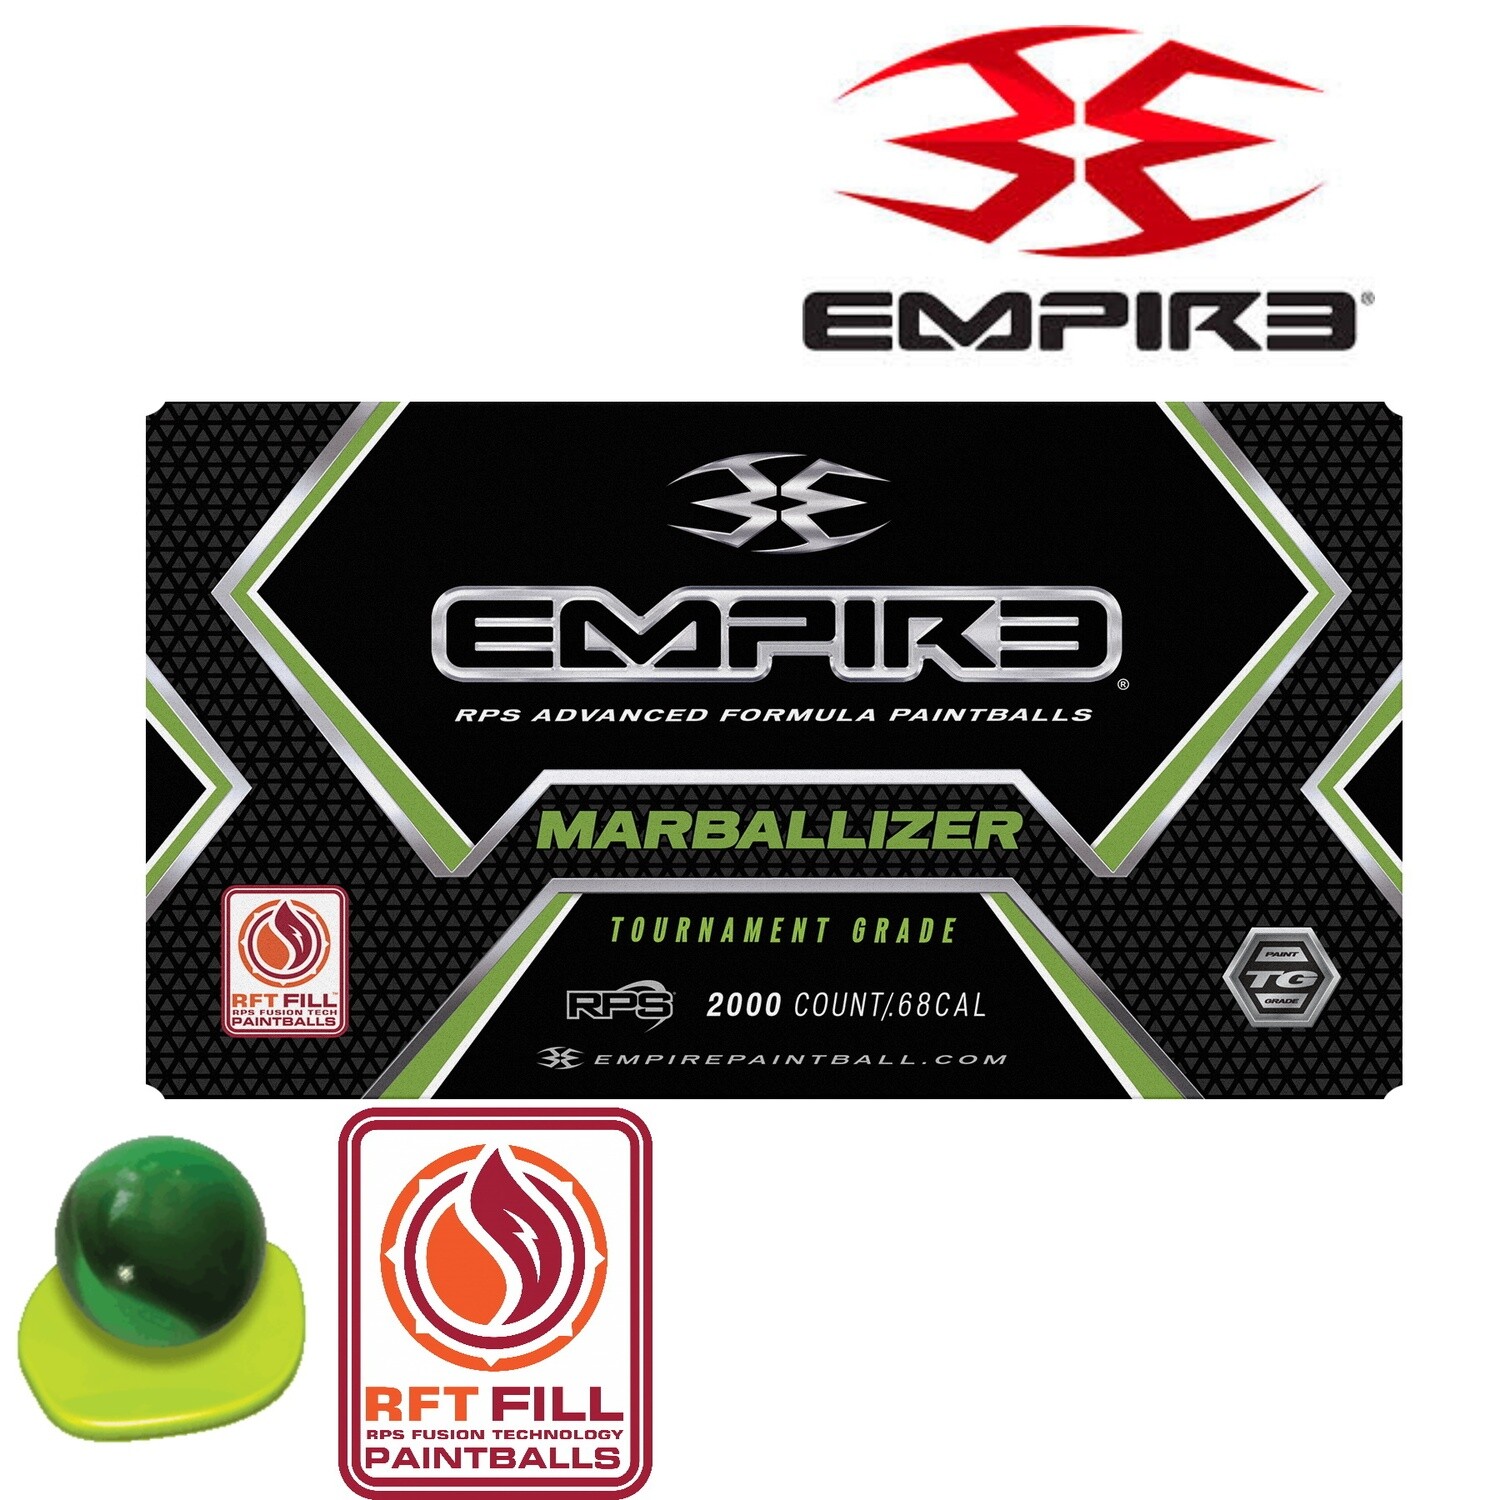 Empire Marballizer .68 cal Paintballs - Case of 2000 Rds - Clear/Green Swirl Shell - Neon Green Fill